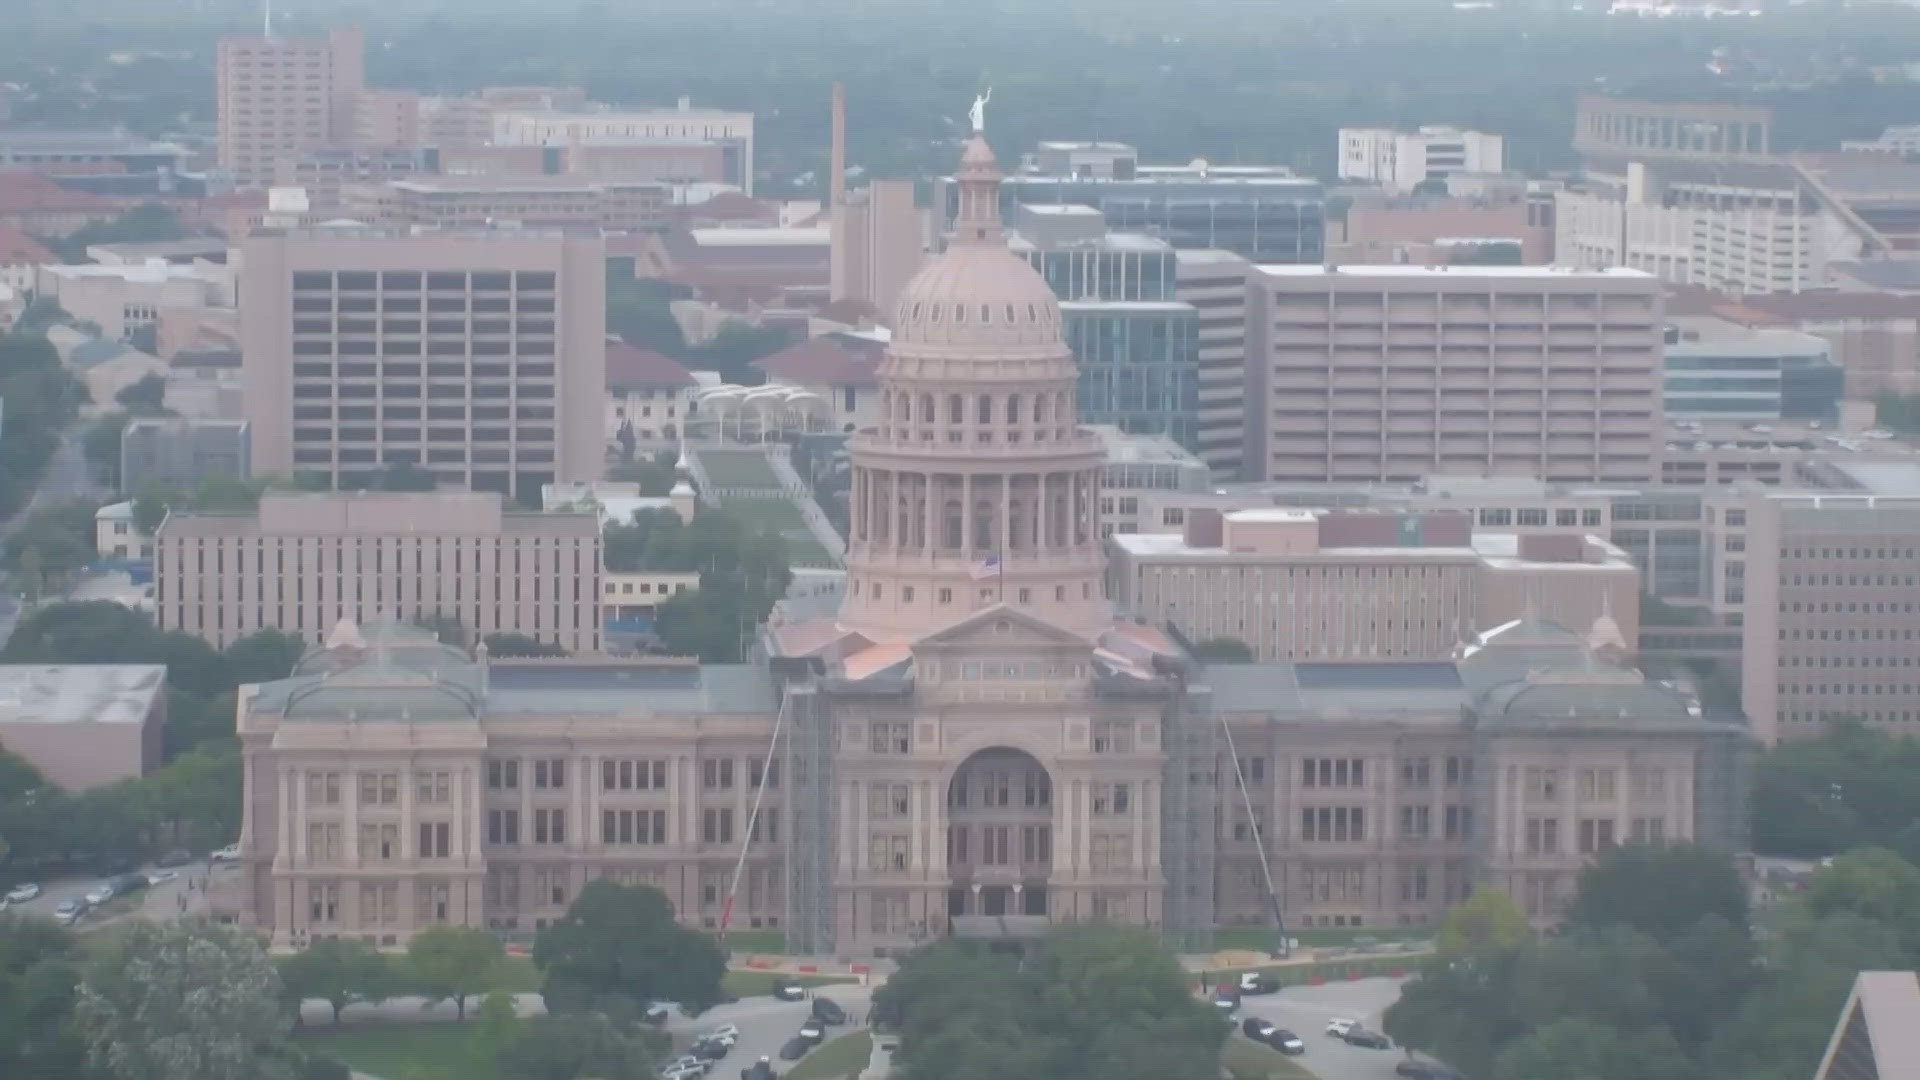 Groups from around Texas will gather at the State Capitol to remember the lives lost in Brownsville.